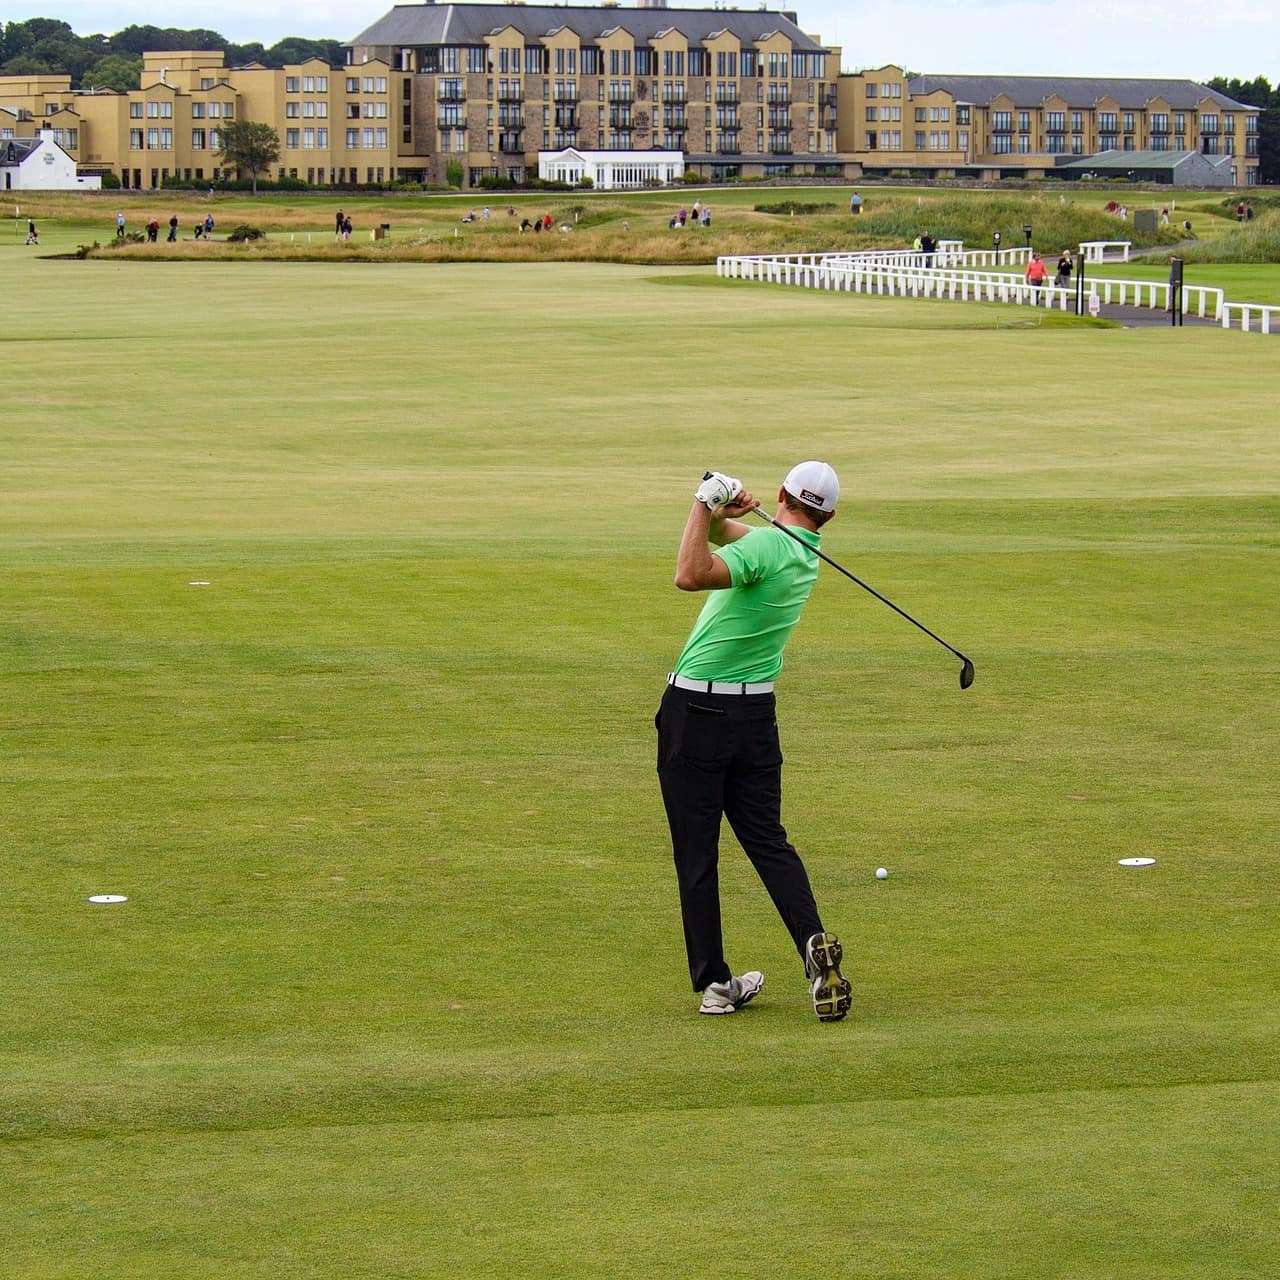 Person swinging a golf club on the fairway with a palatial clubhouse in the background